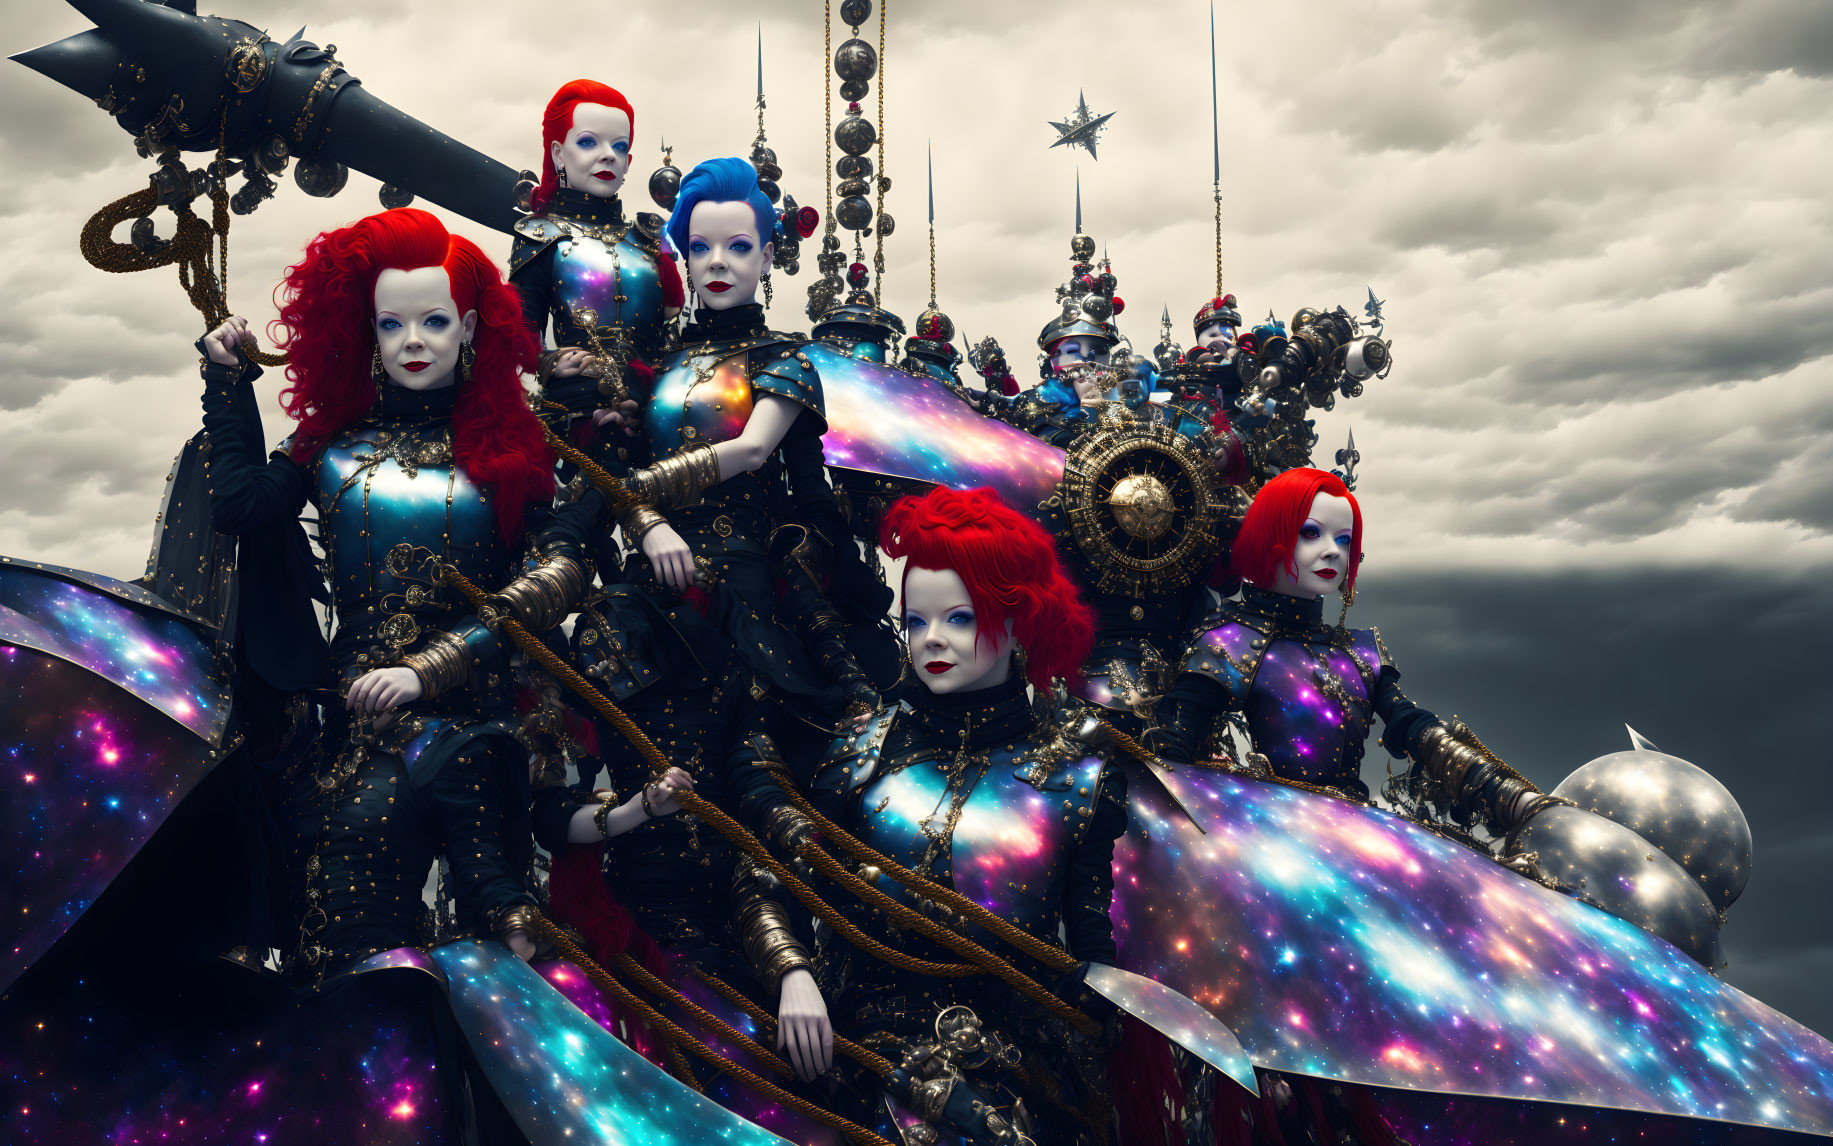 People with Red and Blue Hairstyles in Cosmic Armor under Cloudy Sky